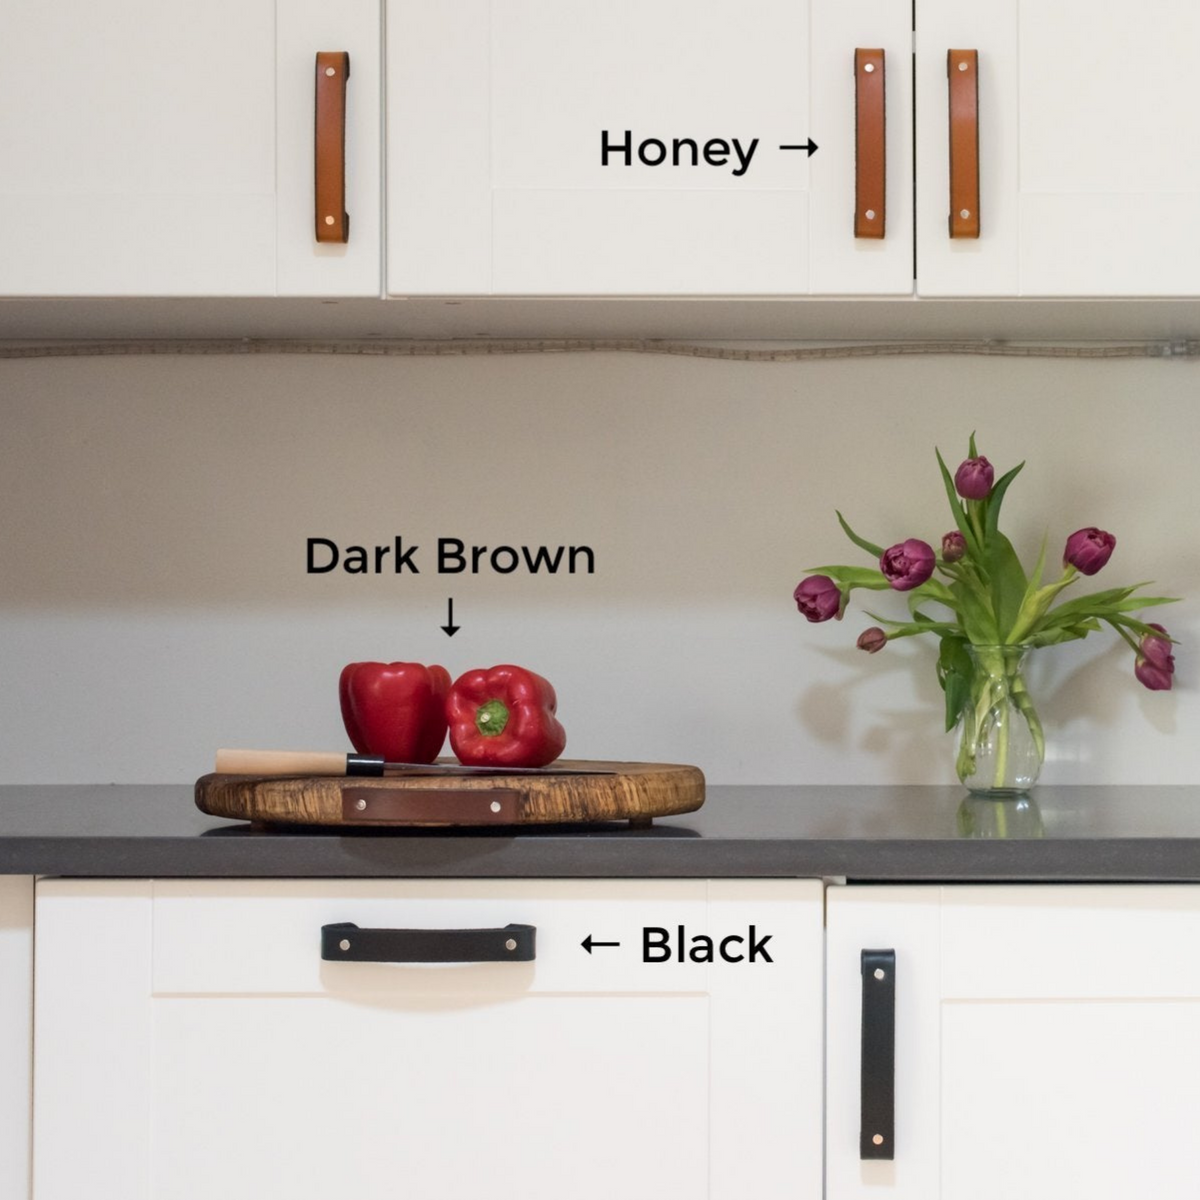 A white kitchen with gray countertops and 3 leather colors in one photo: Honey leather handles on the top cabinets, a dark brown leather handle attached to a wood cutting board, and black on the bottom cabinets. 